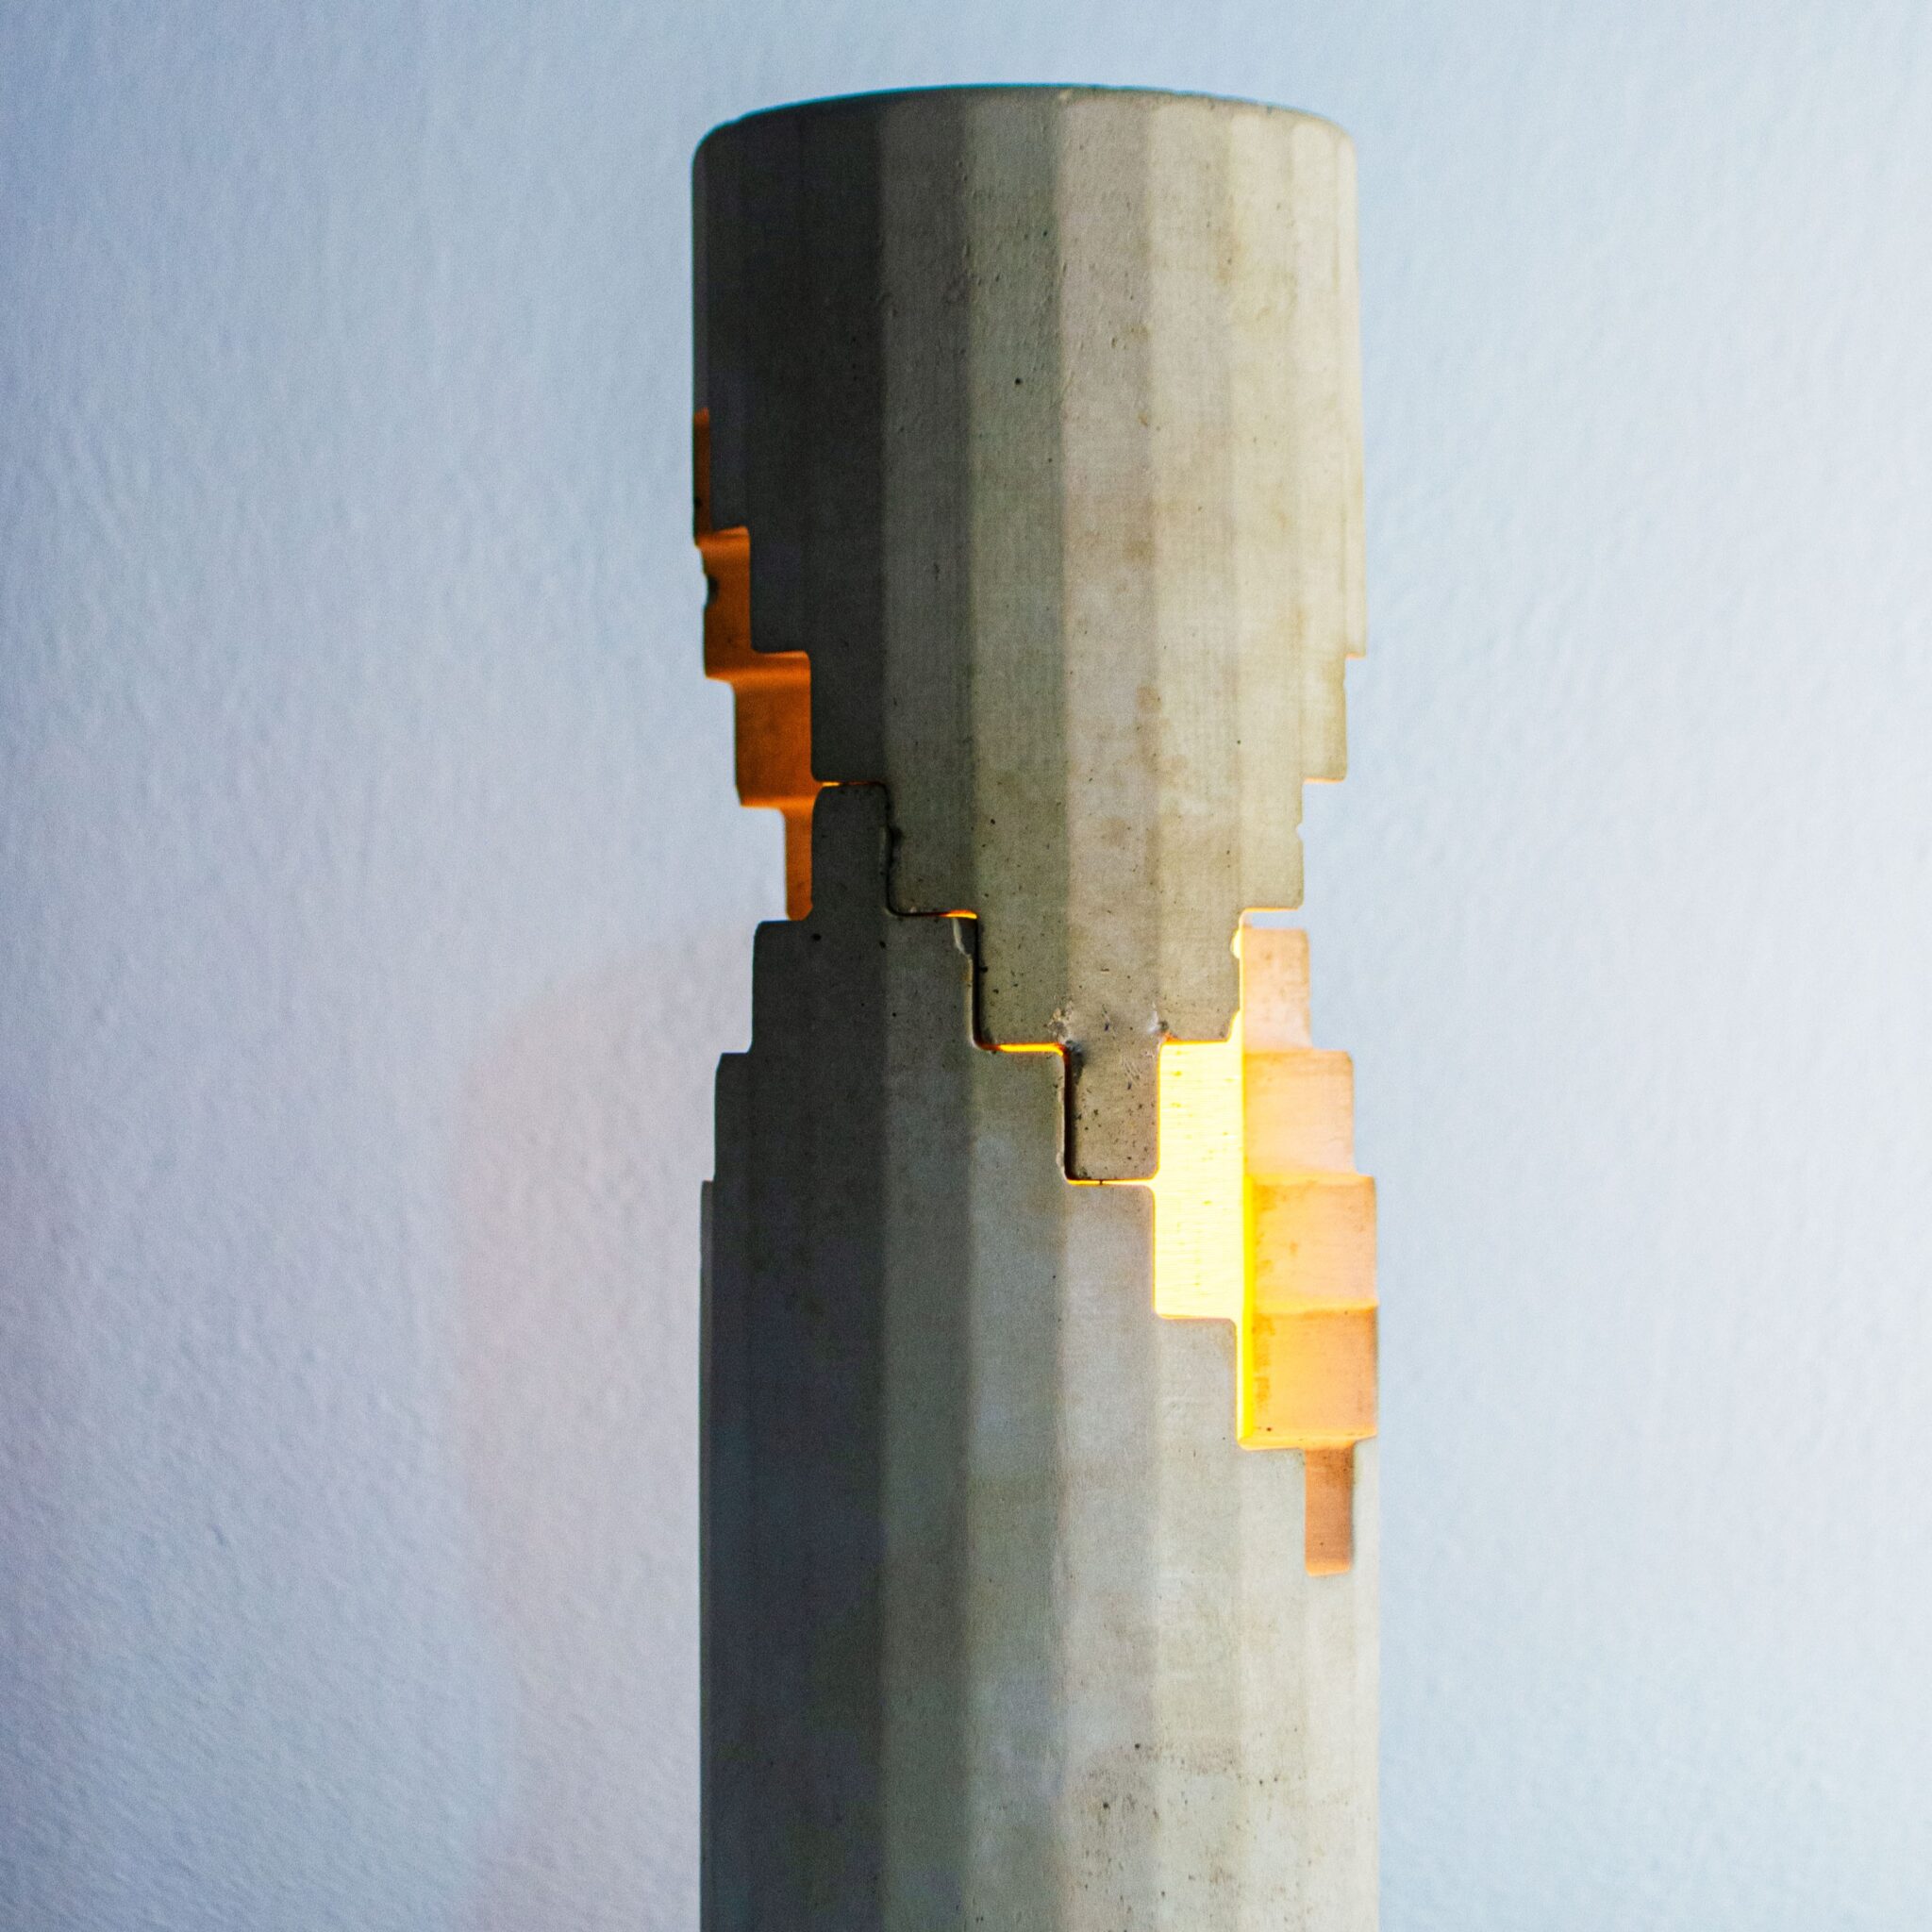 Concrete design interactive lamp from studio monstro. Scalae interactive lamp made out of concrete